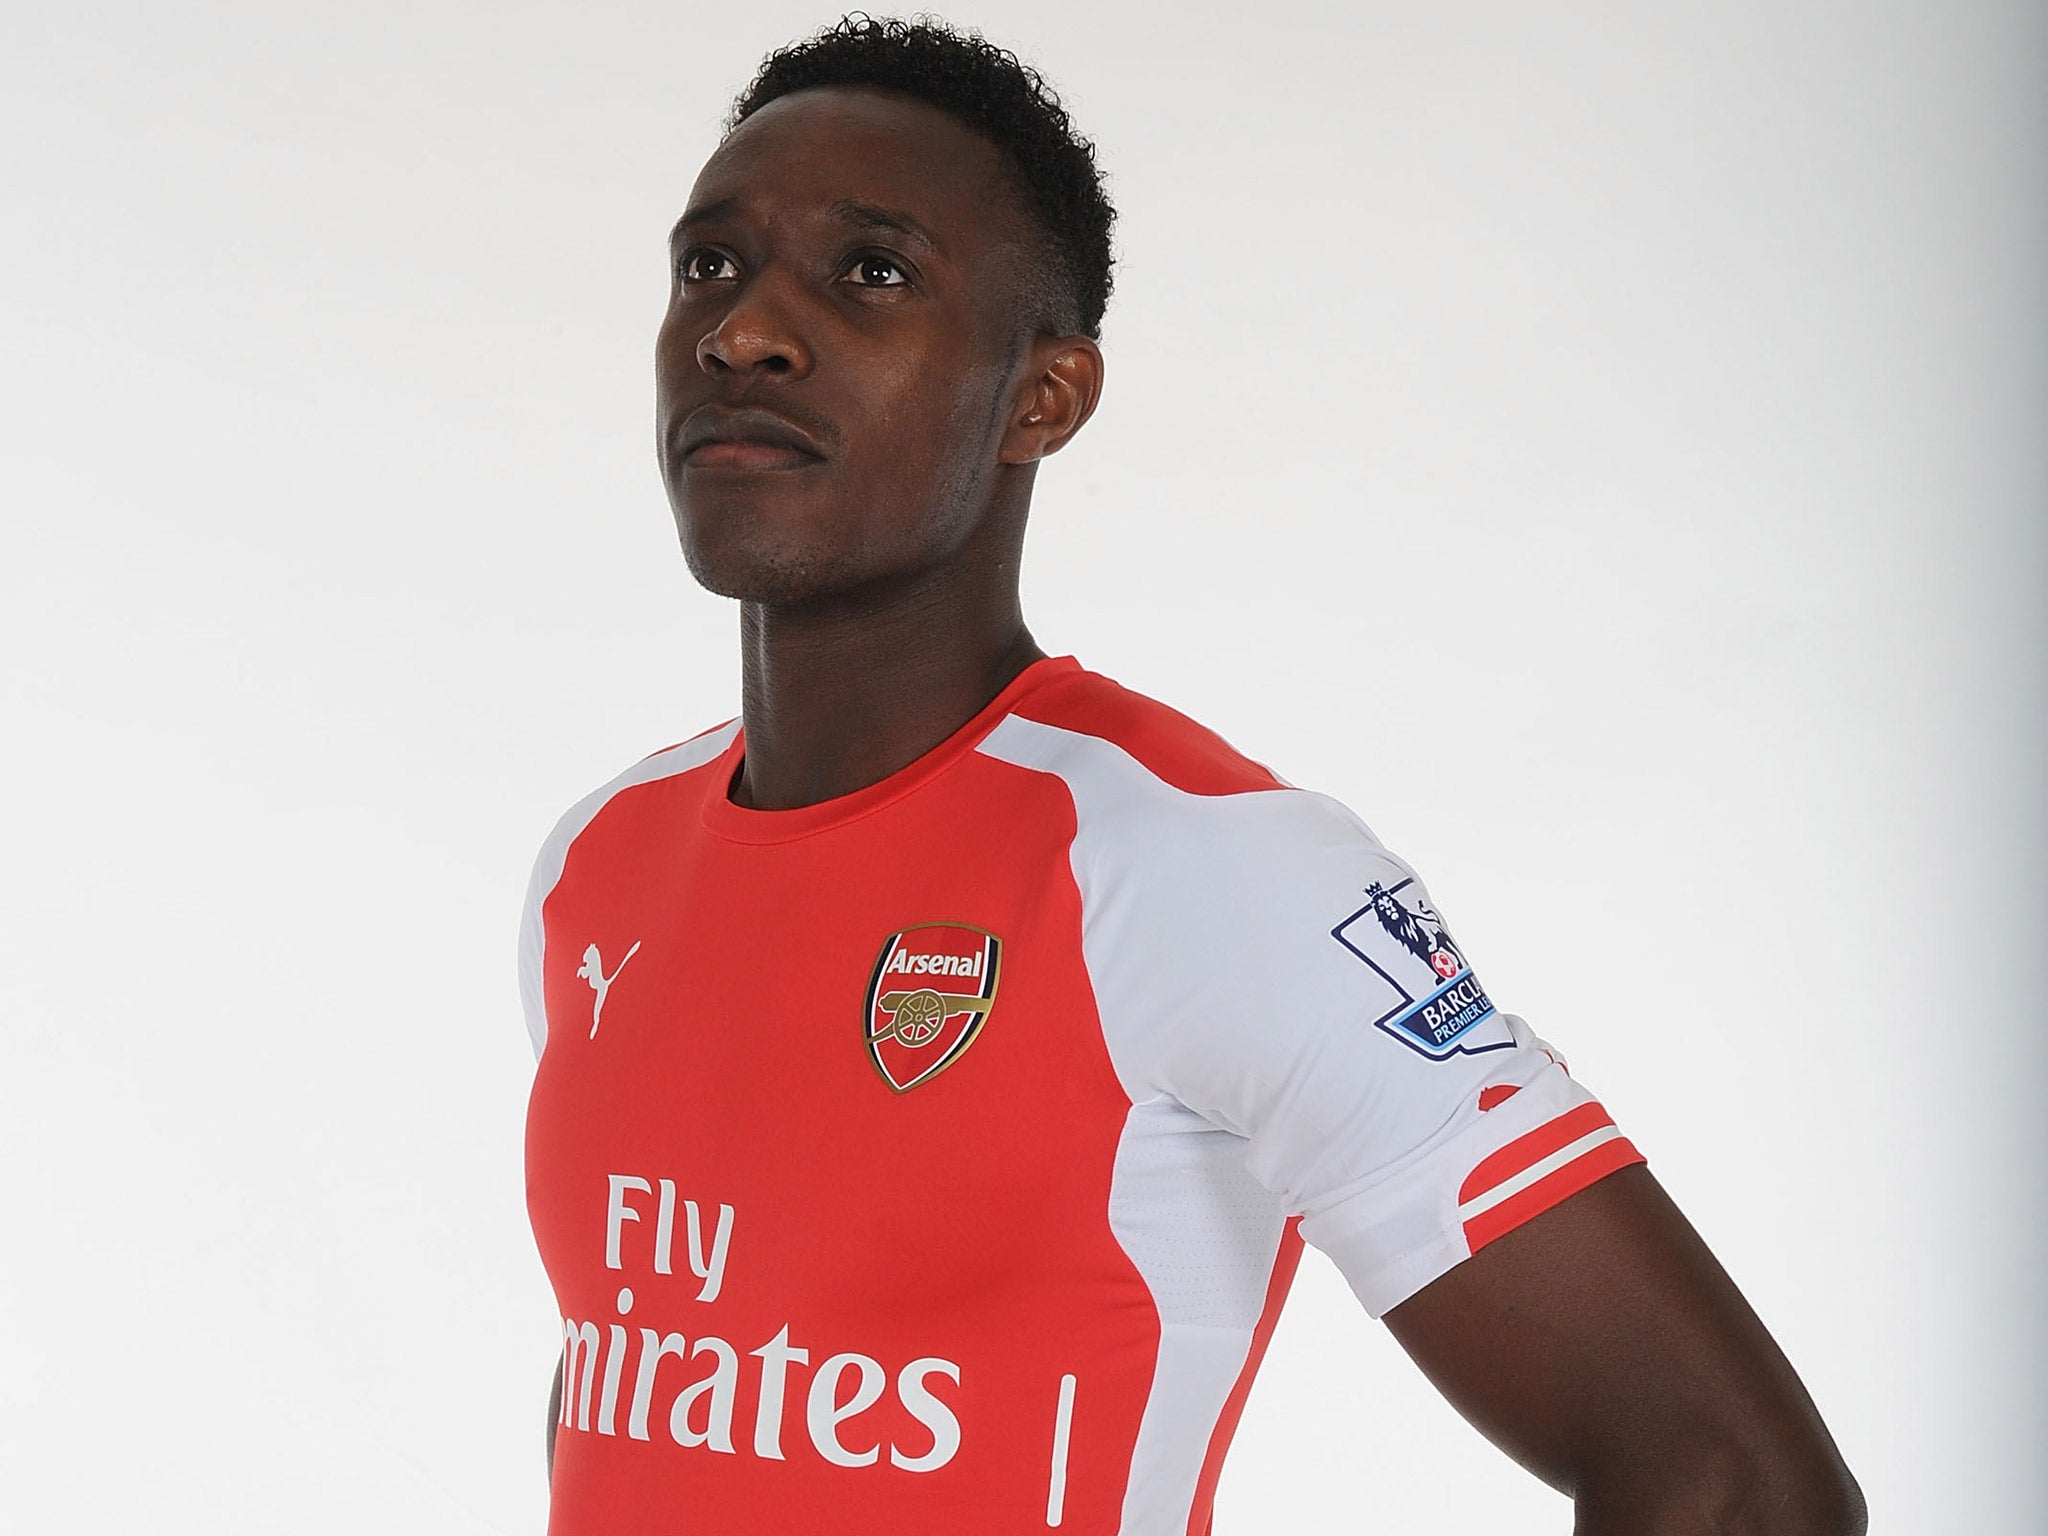 Danny Welbeck was signed by Arsenal at the last minute amid chaos about who his agent was